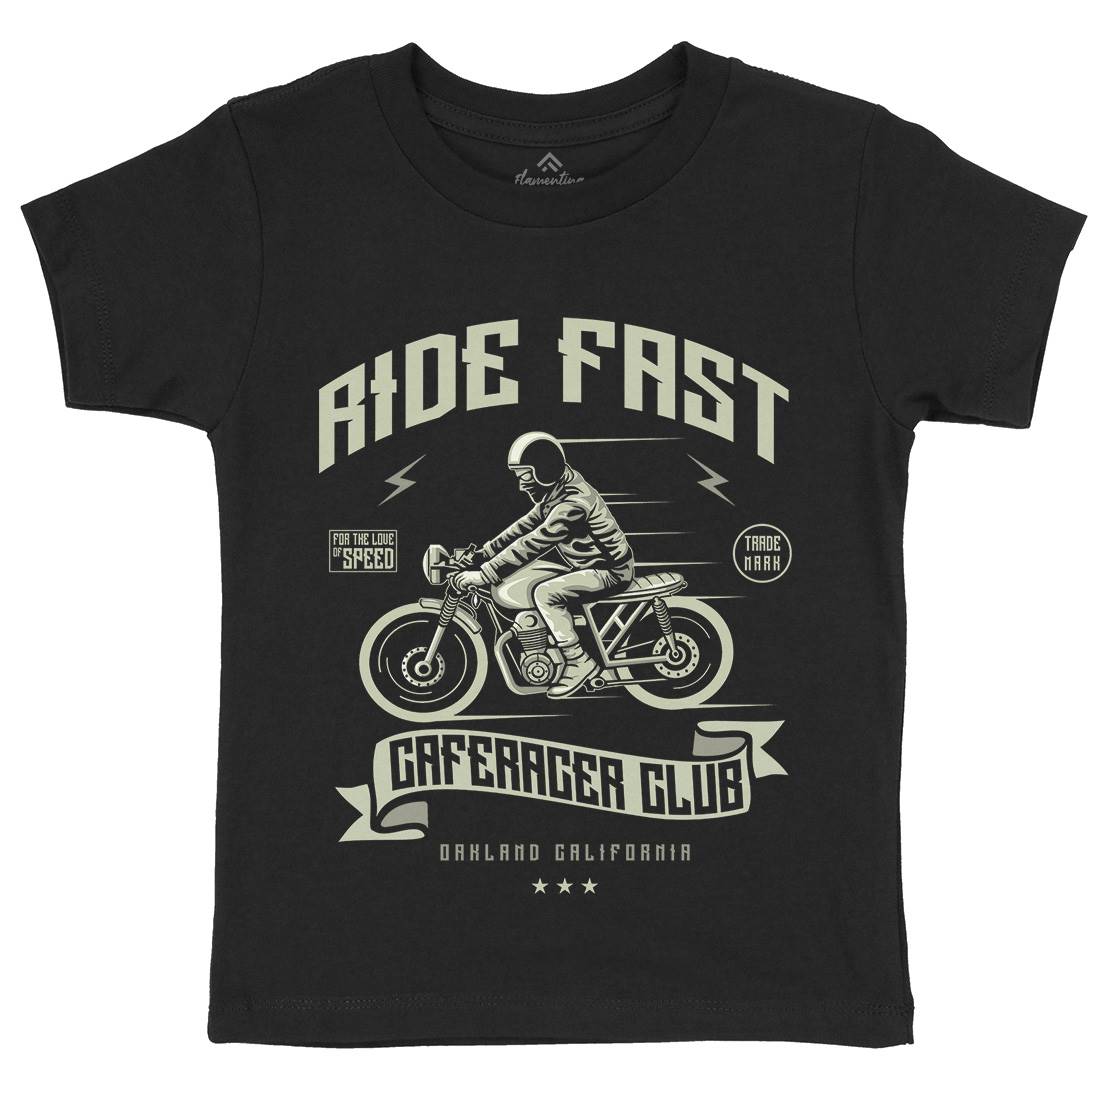 Ride Fast Kids Crew Neck T-Shirt Motorcycles A117